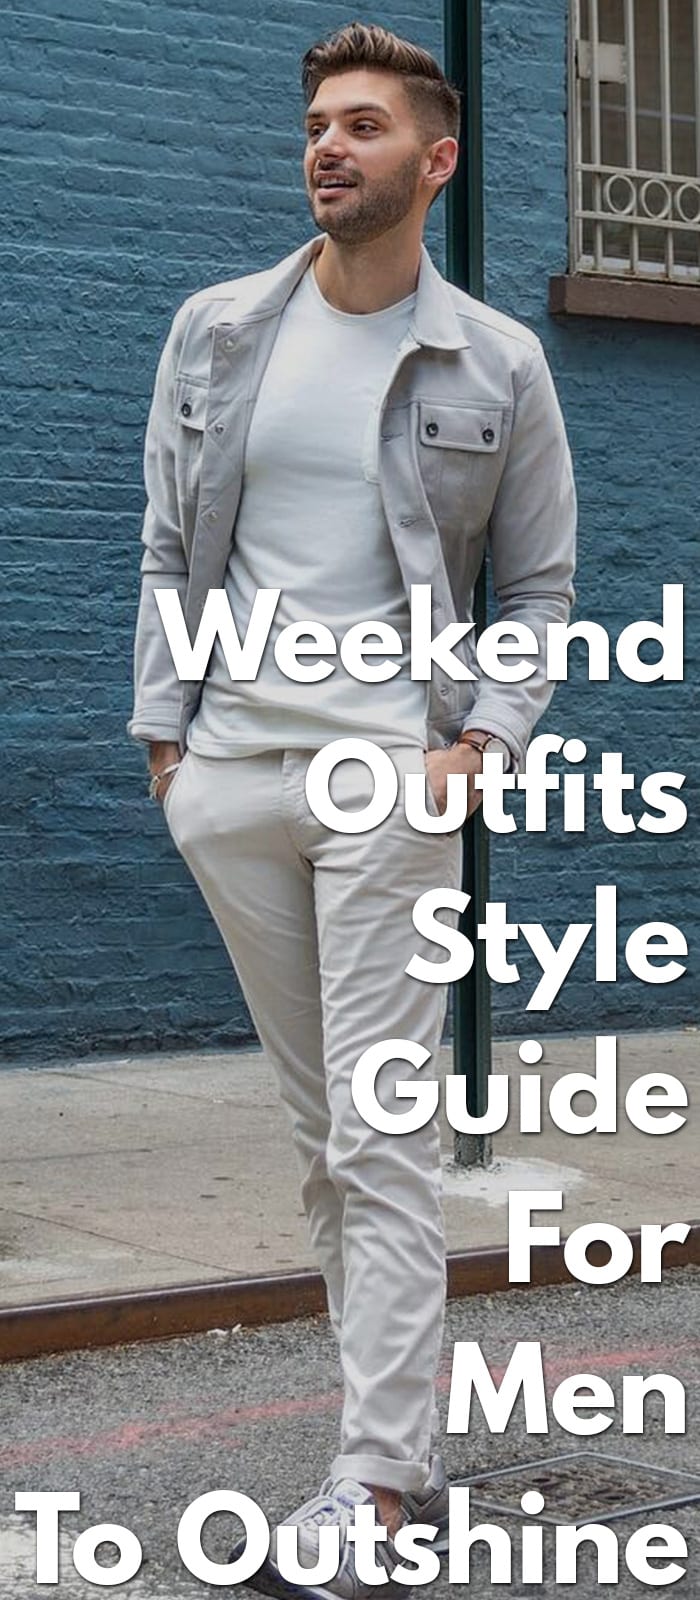 Weekend-Outfits-Style-Guide-For-Men-To-Outshine......